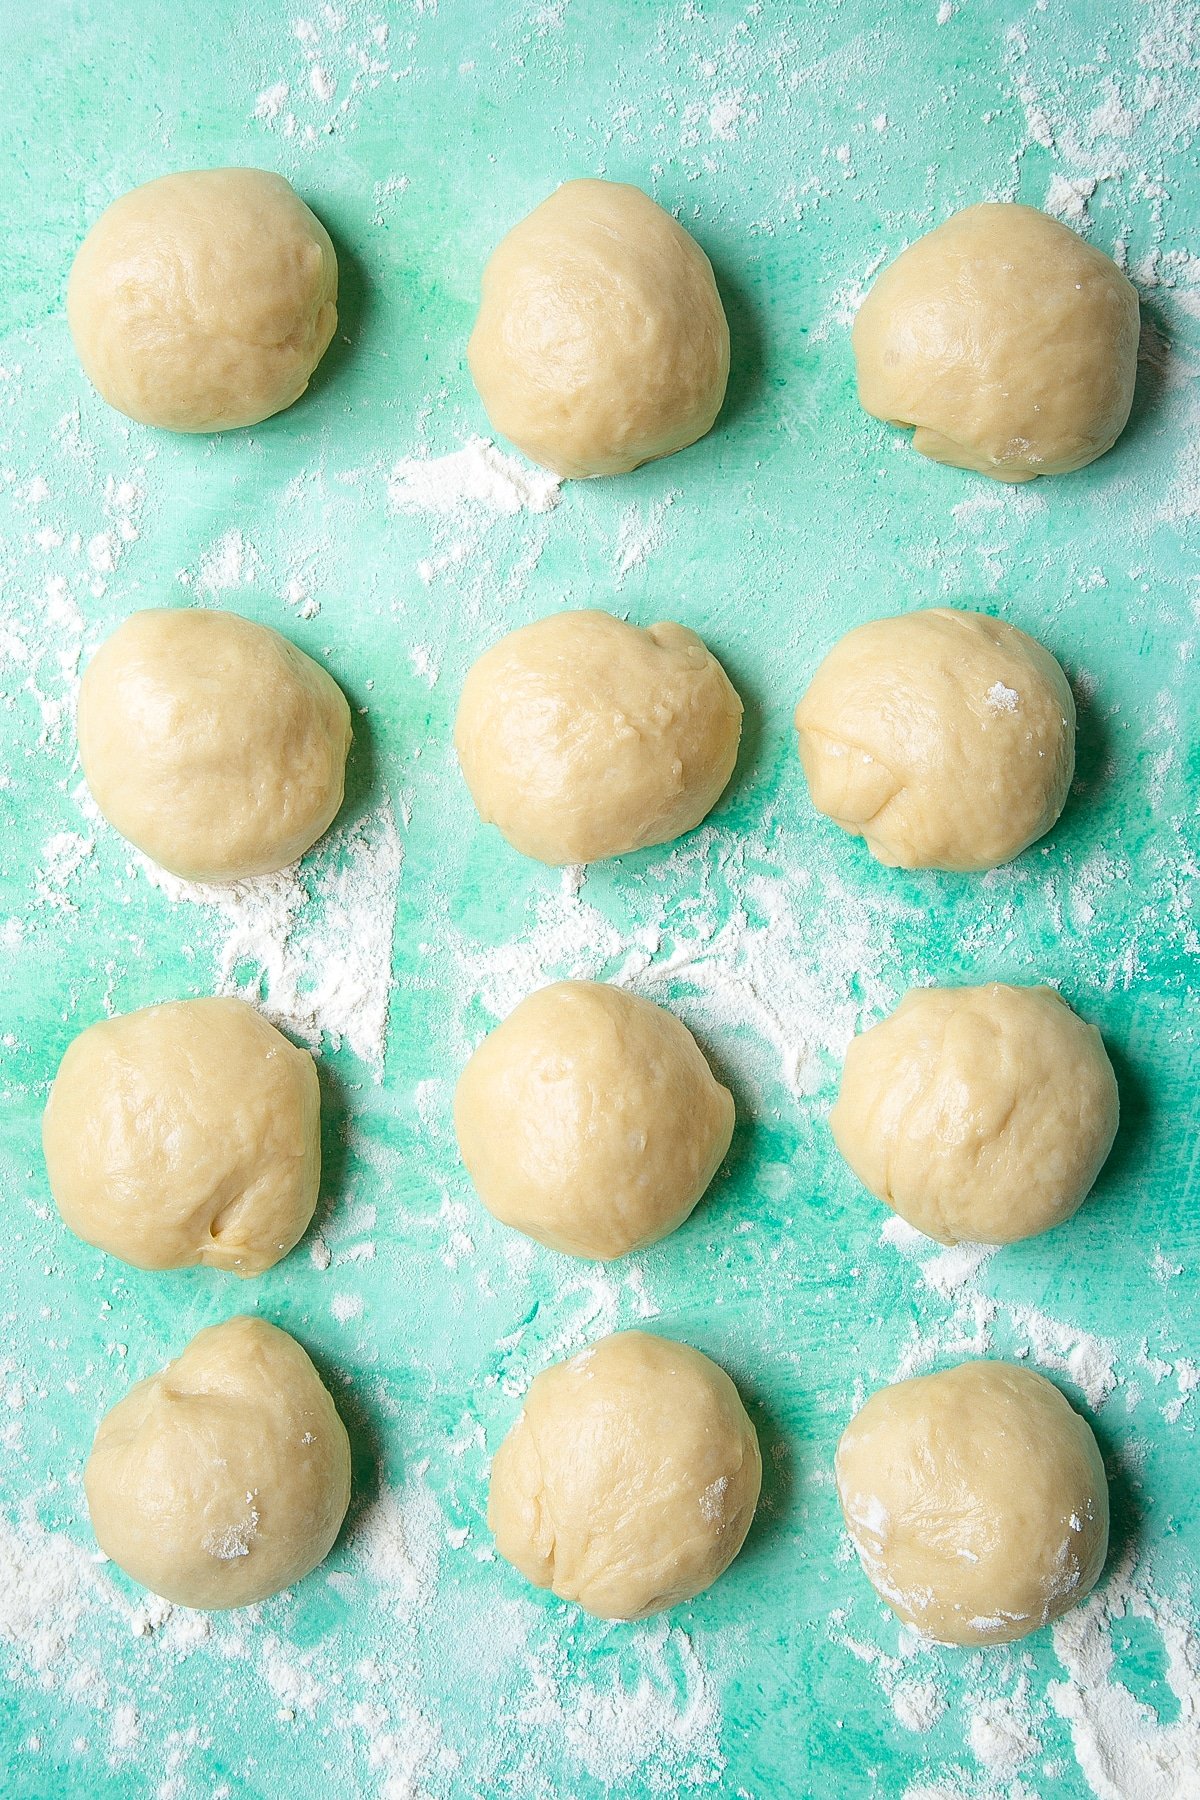 Bread dough rolled into 12 balls on a floured surface.